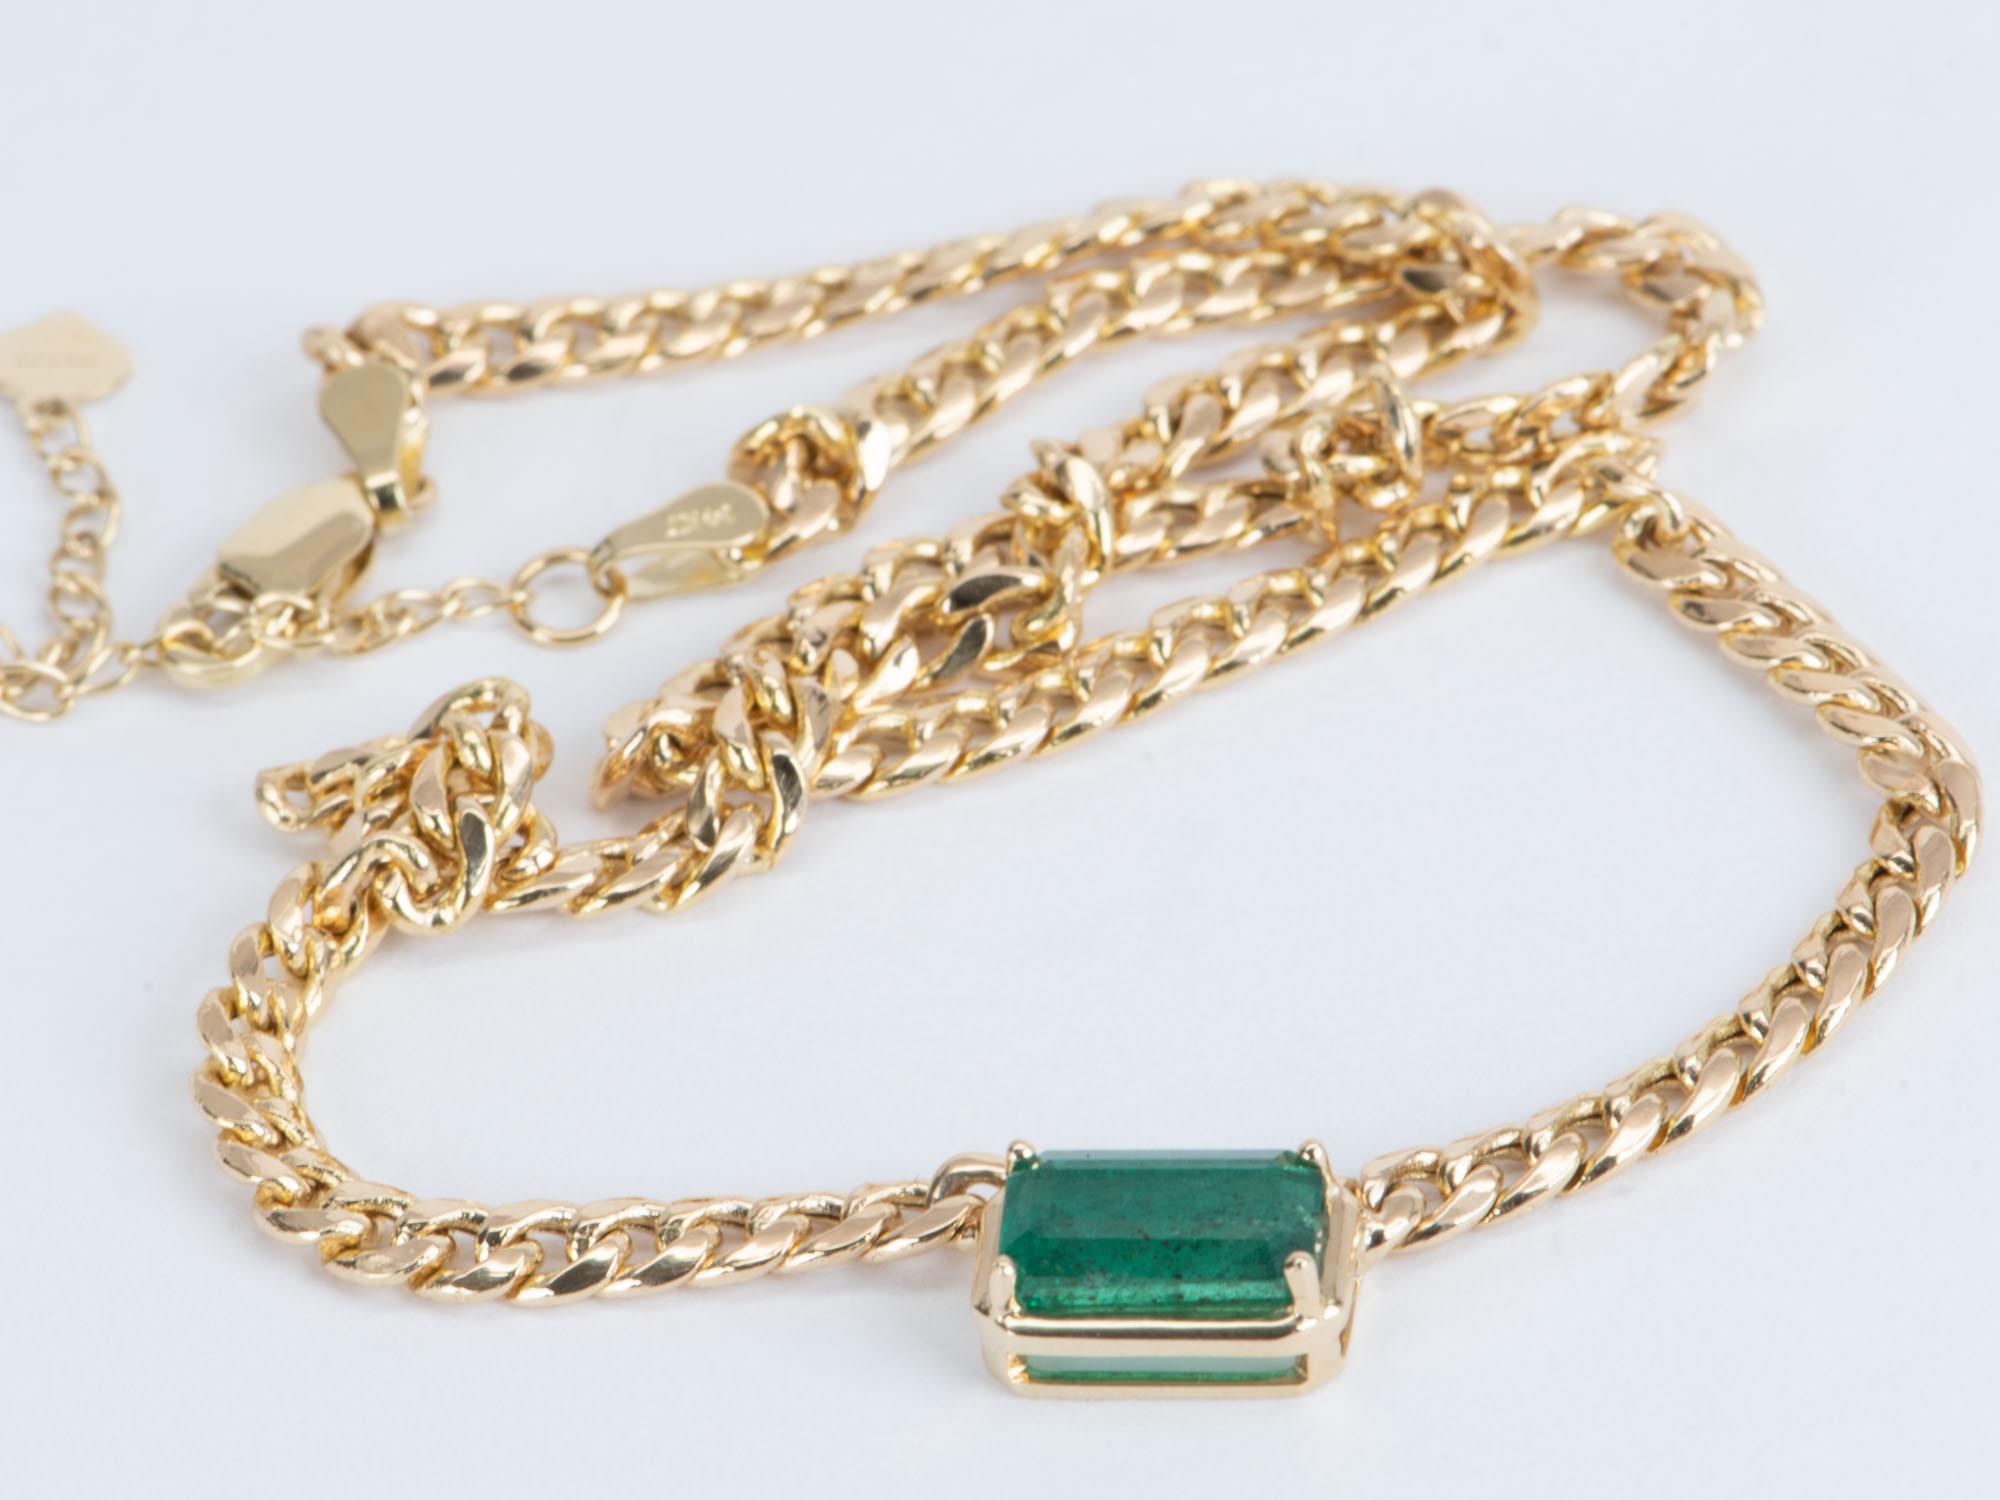 Emerald Cut 2.15ct Emerald East West Set on Miami Cuban Chain Choker Necklace 14K Gold R4475